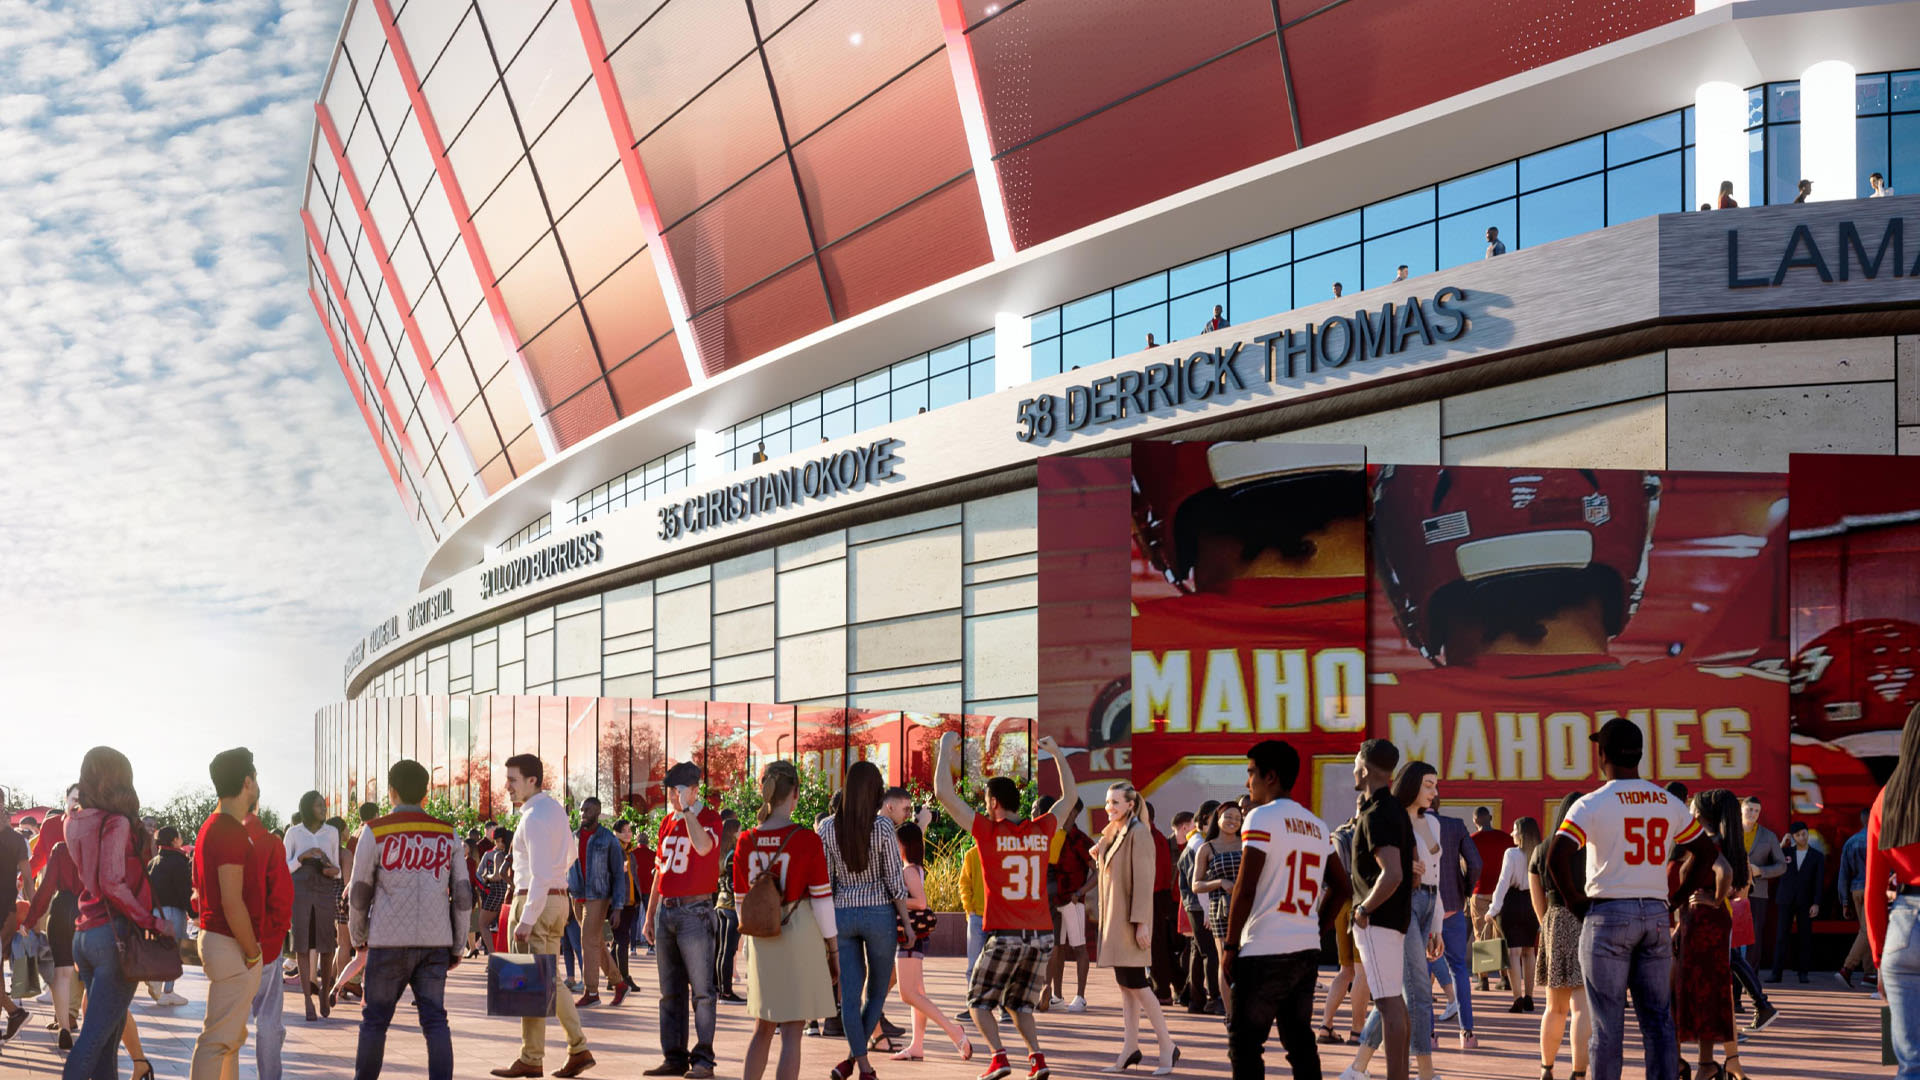 Kansas City 'could host Super Bowl' in proposed new stadium designed for Chiefs